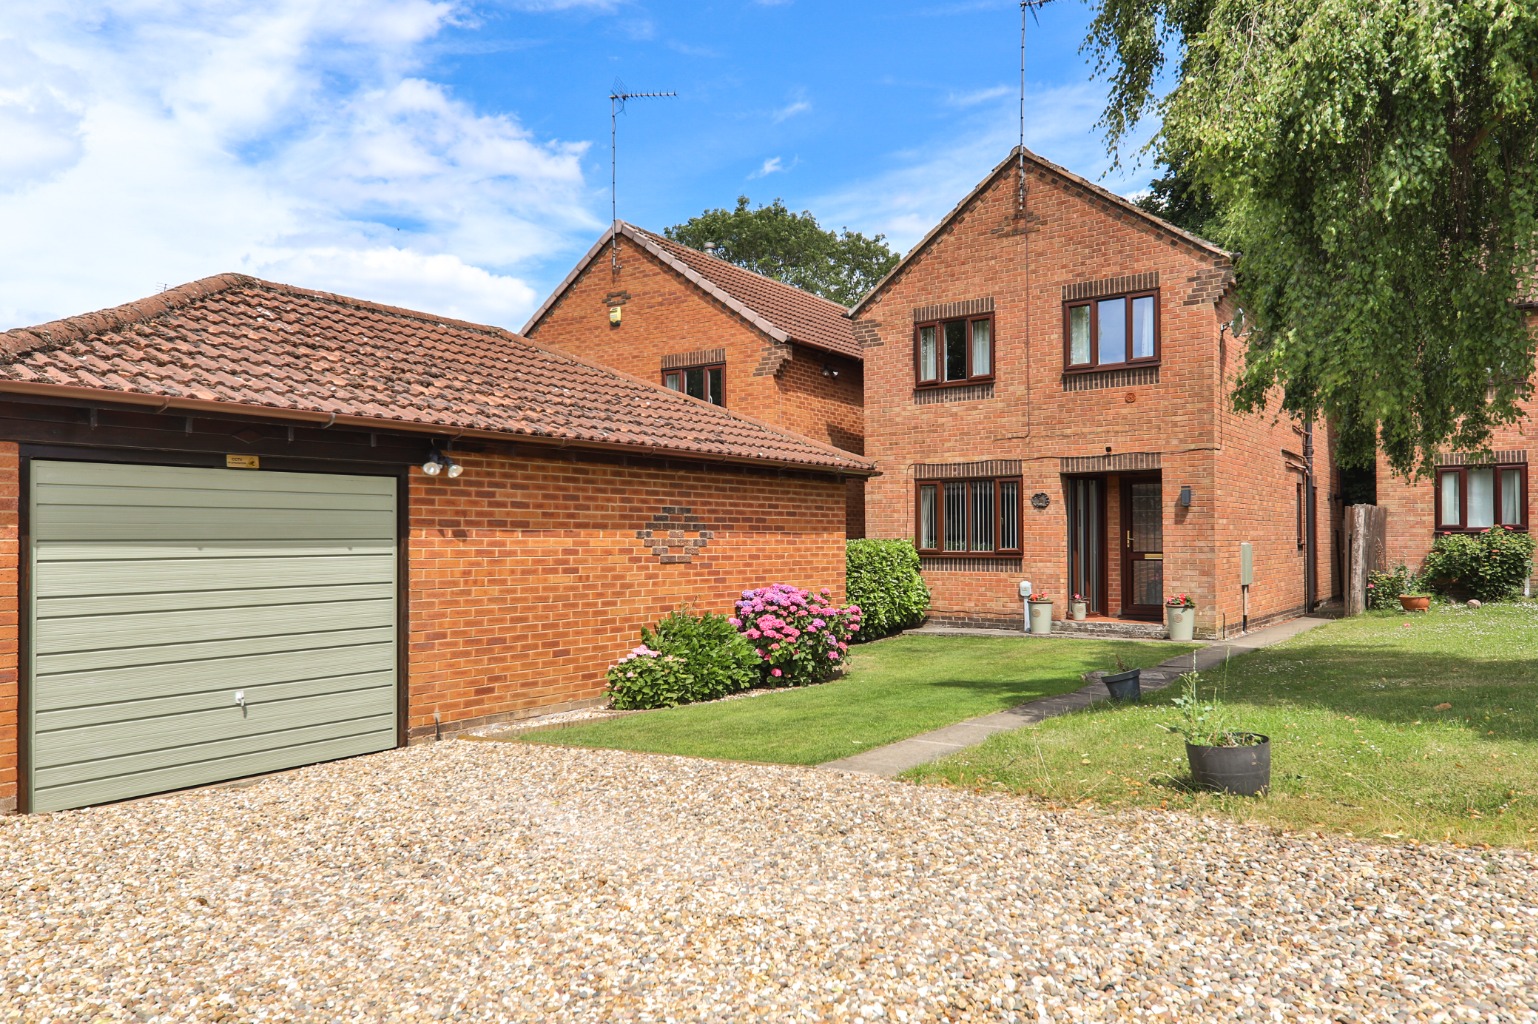 4 bed detached house for sale in Lawson Close, Beverley, HU17